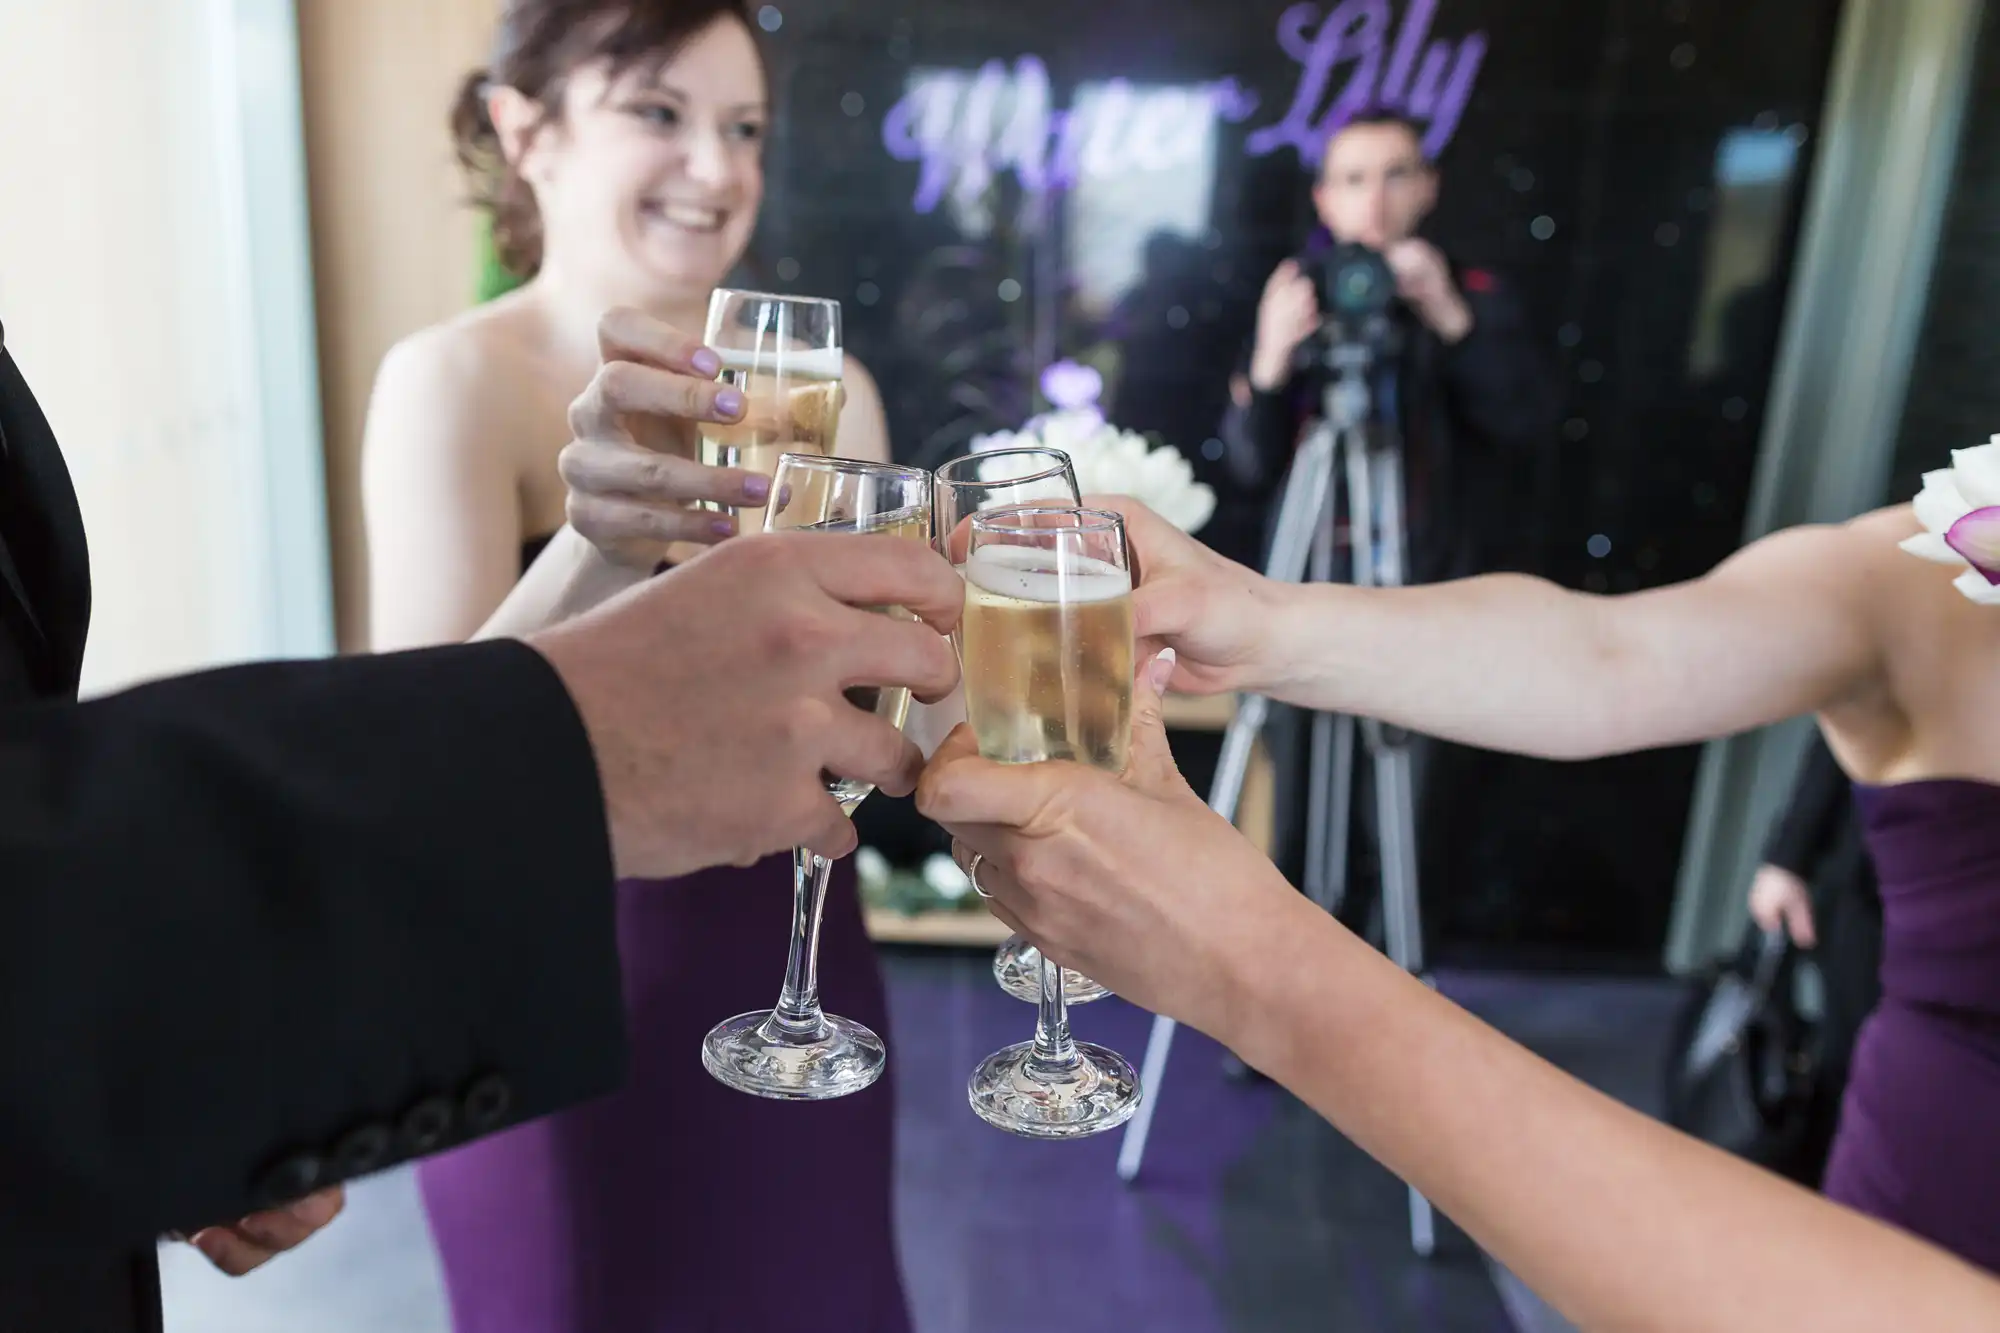 Group of people toasting with champagne glasses at a celebratory event, with a photographer in the background.